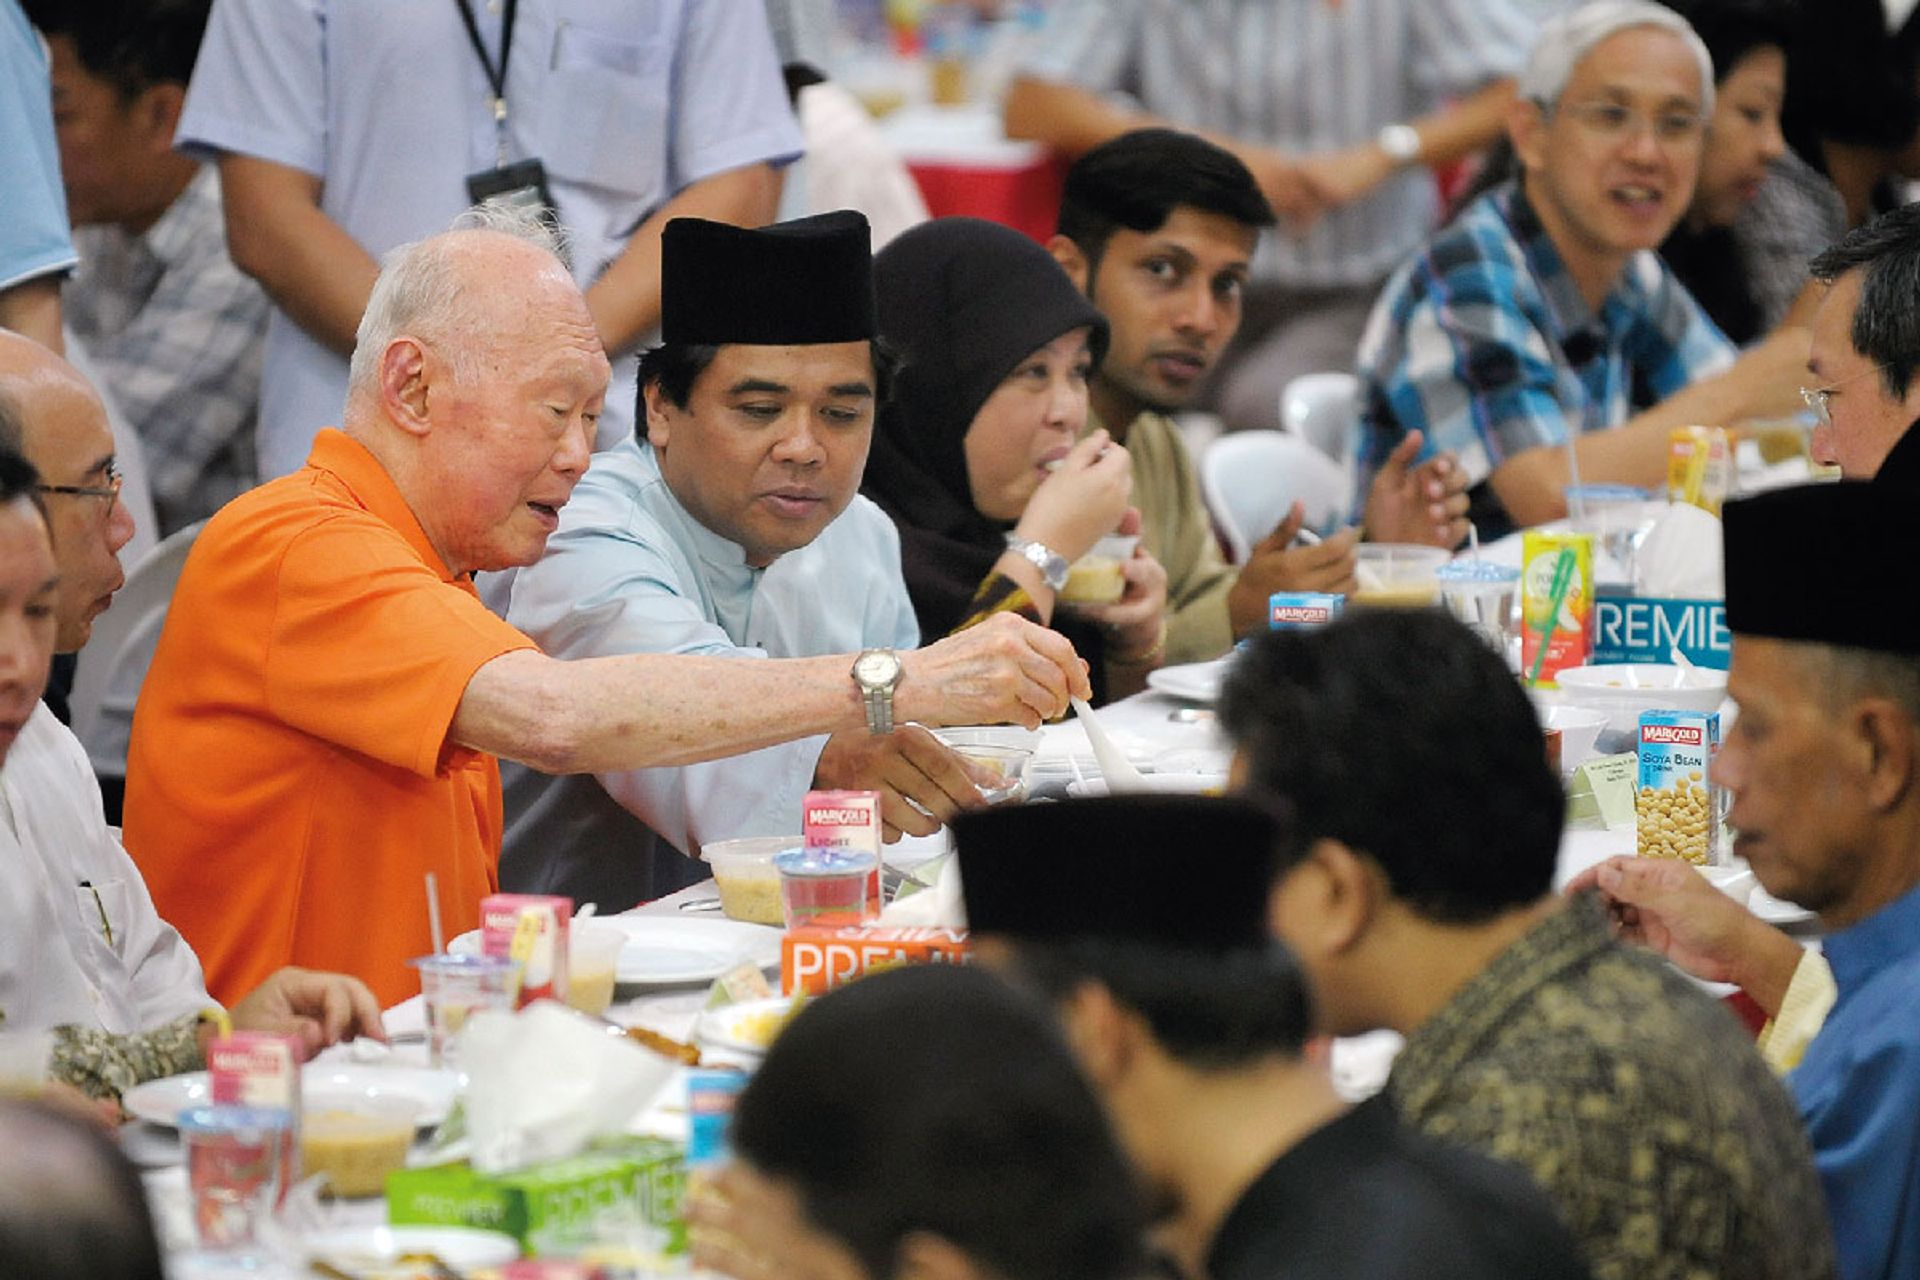 Breaking fast with 1,000 Radin Mas residents – both Muslim and non-Muslim – to celebrate Racial Harmony Day on Sept 4, 2010. ST Photo: Desmond Lim